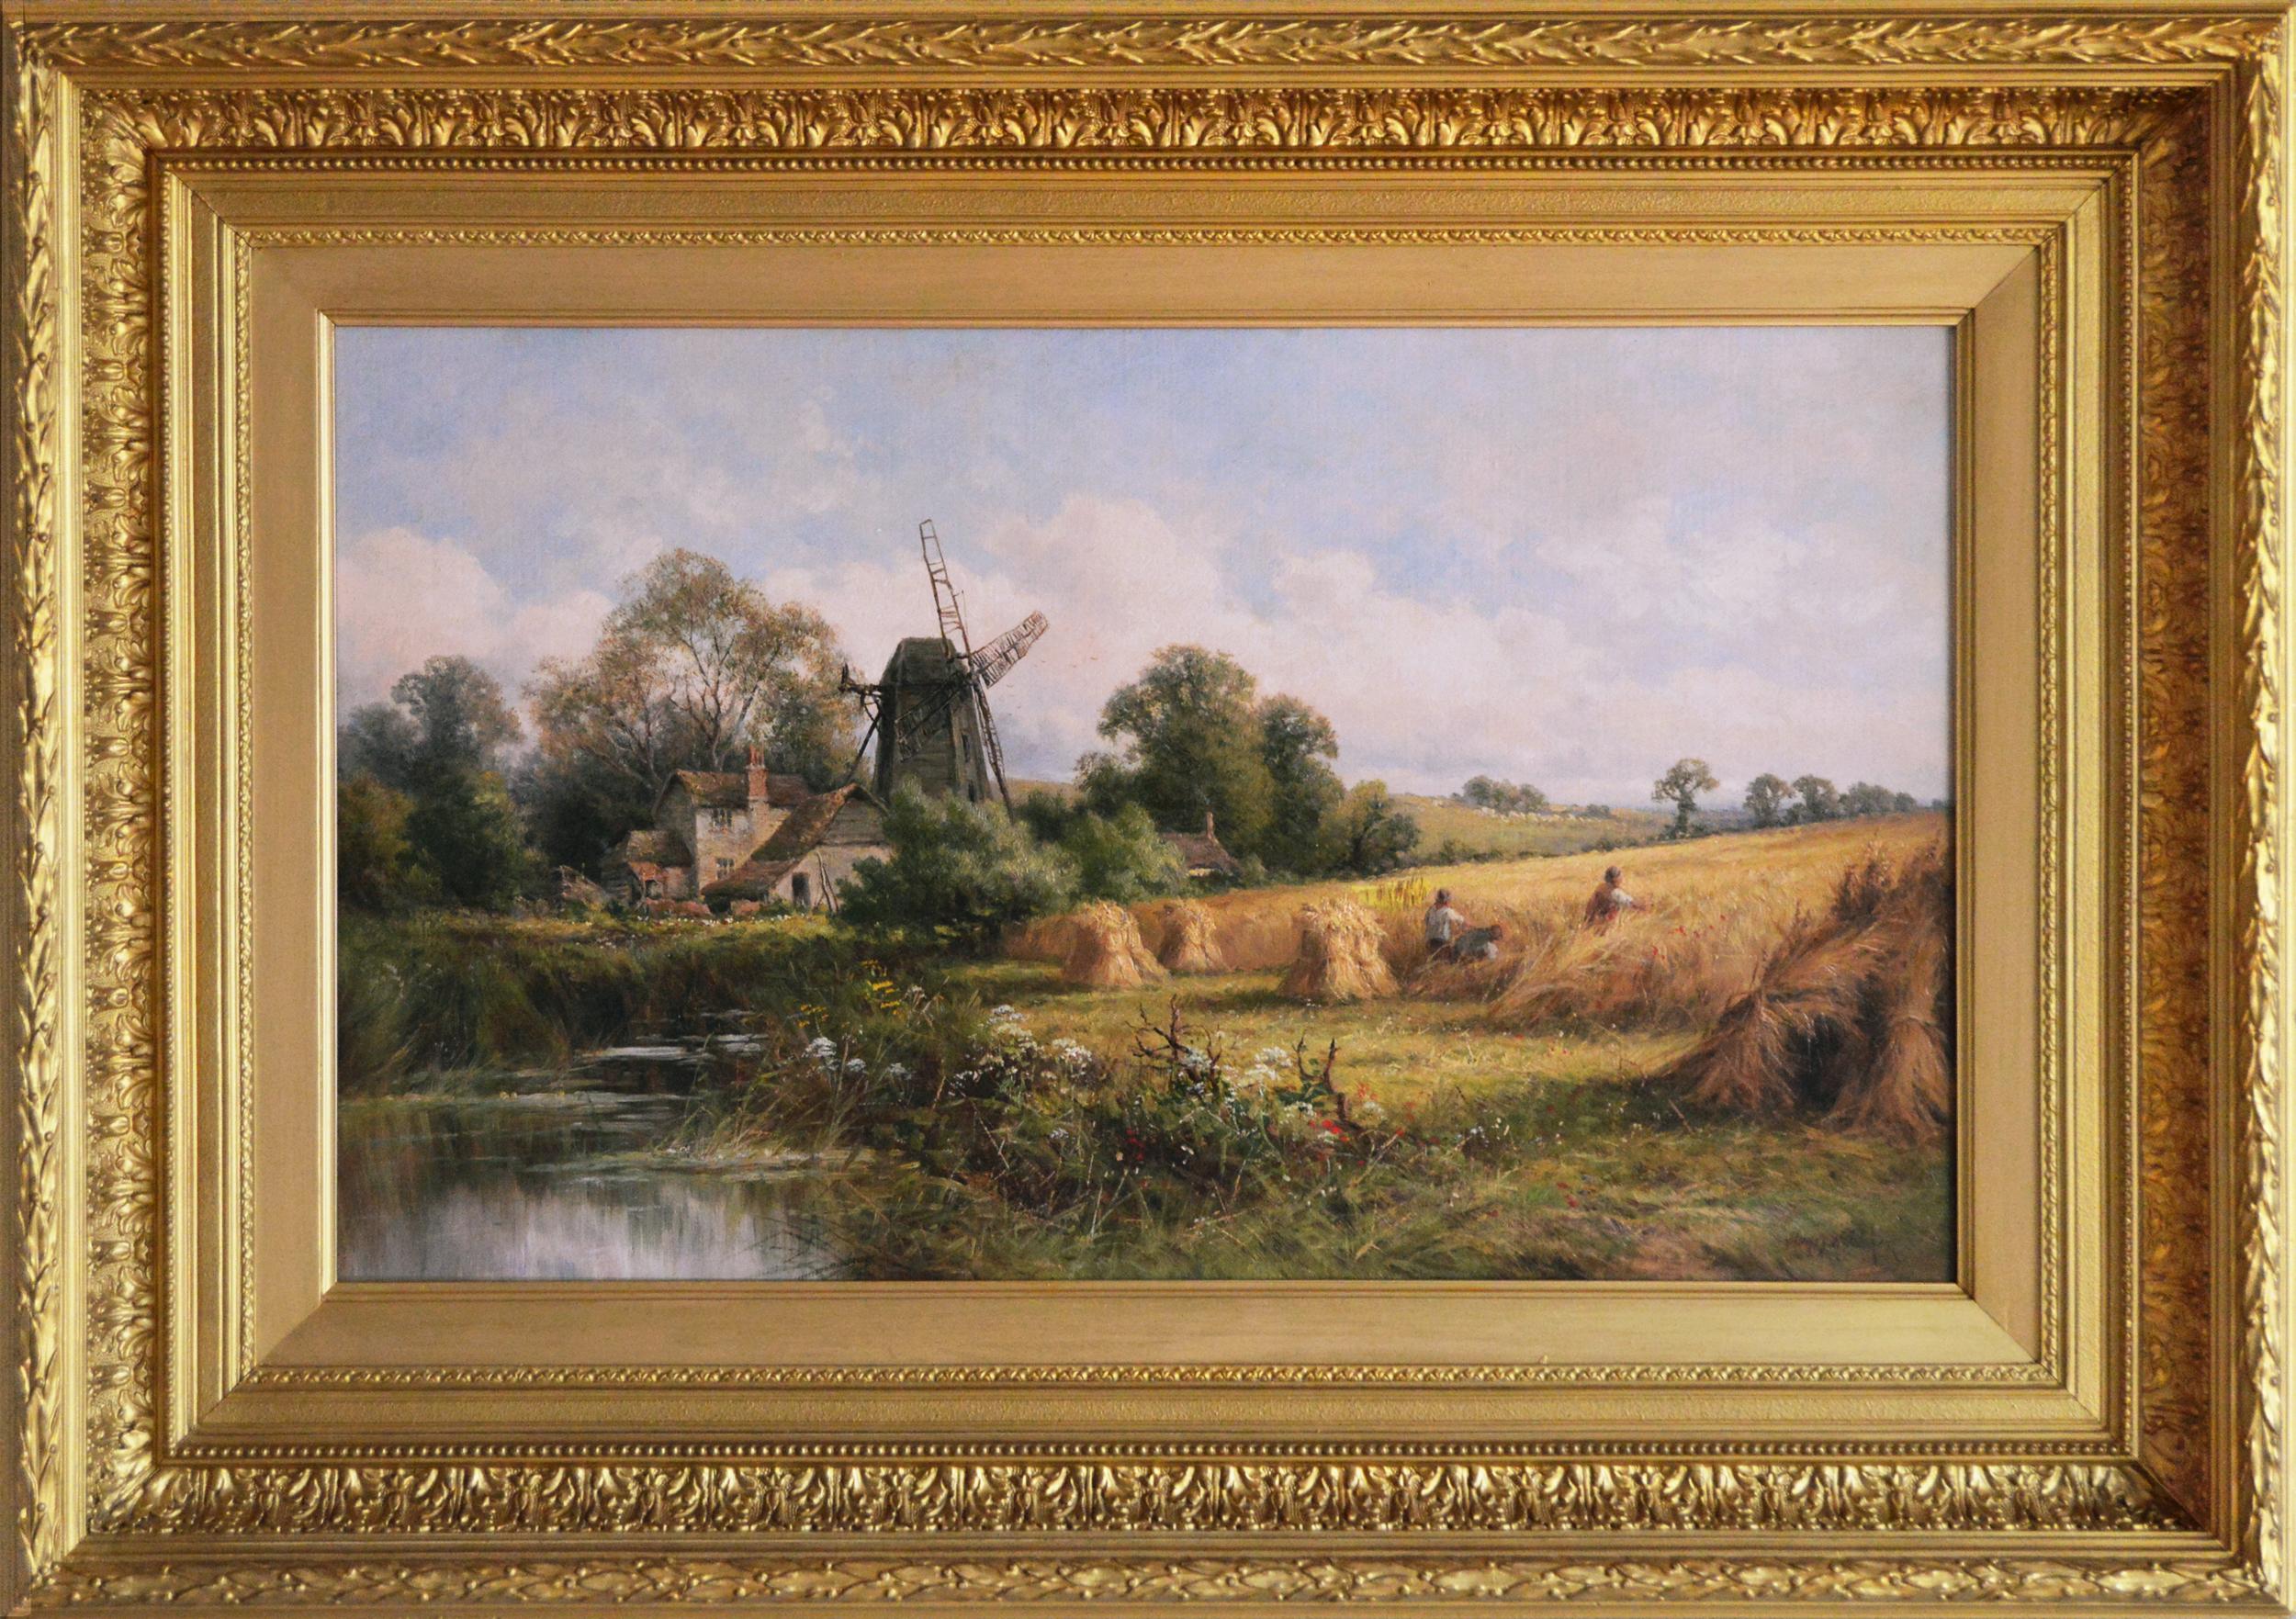 19th Century landscape oil painting of a windmill near a cornfield